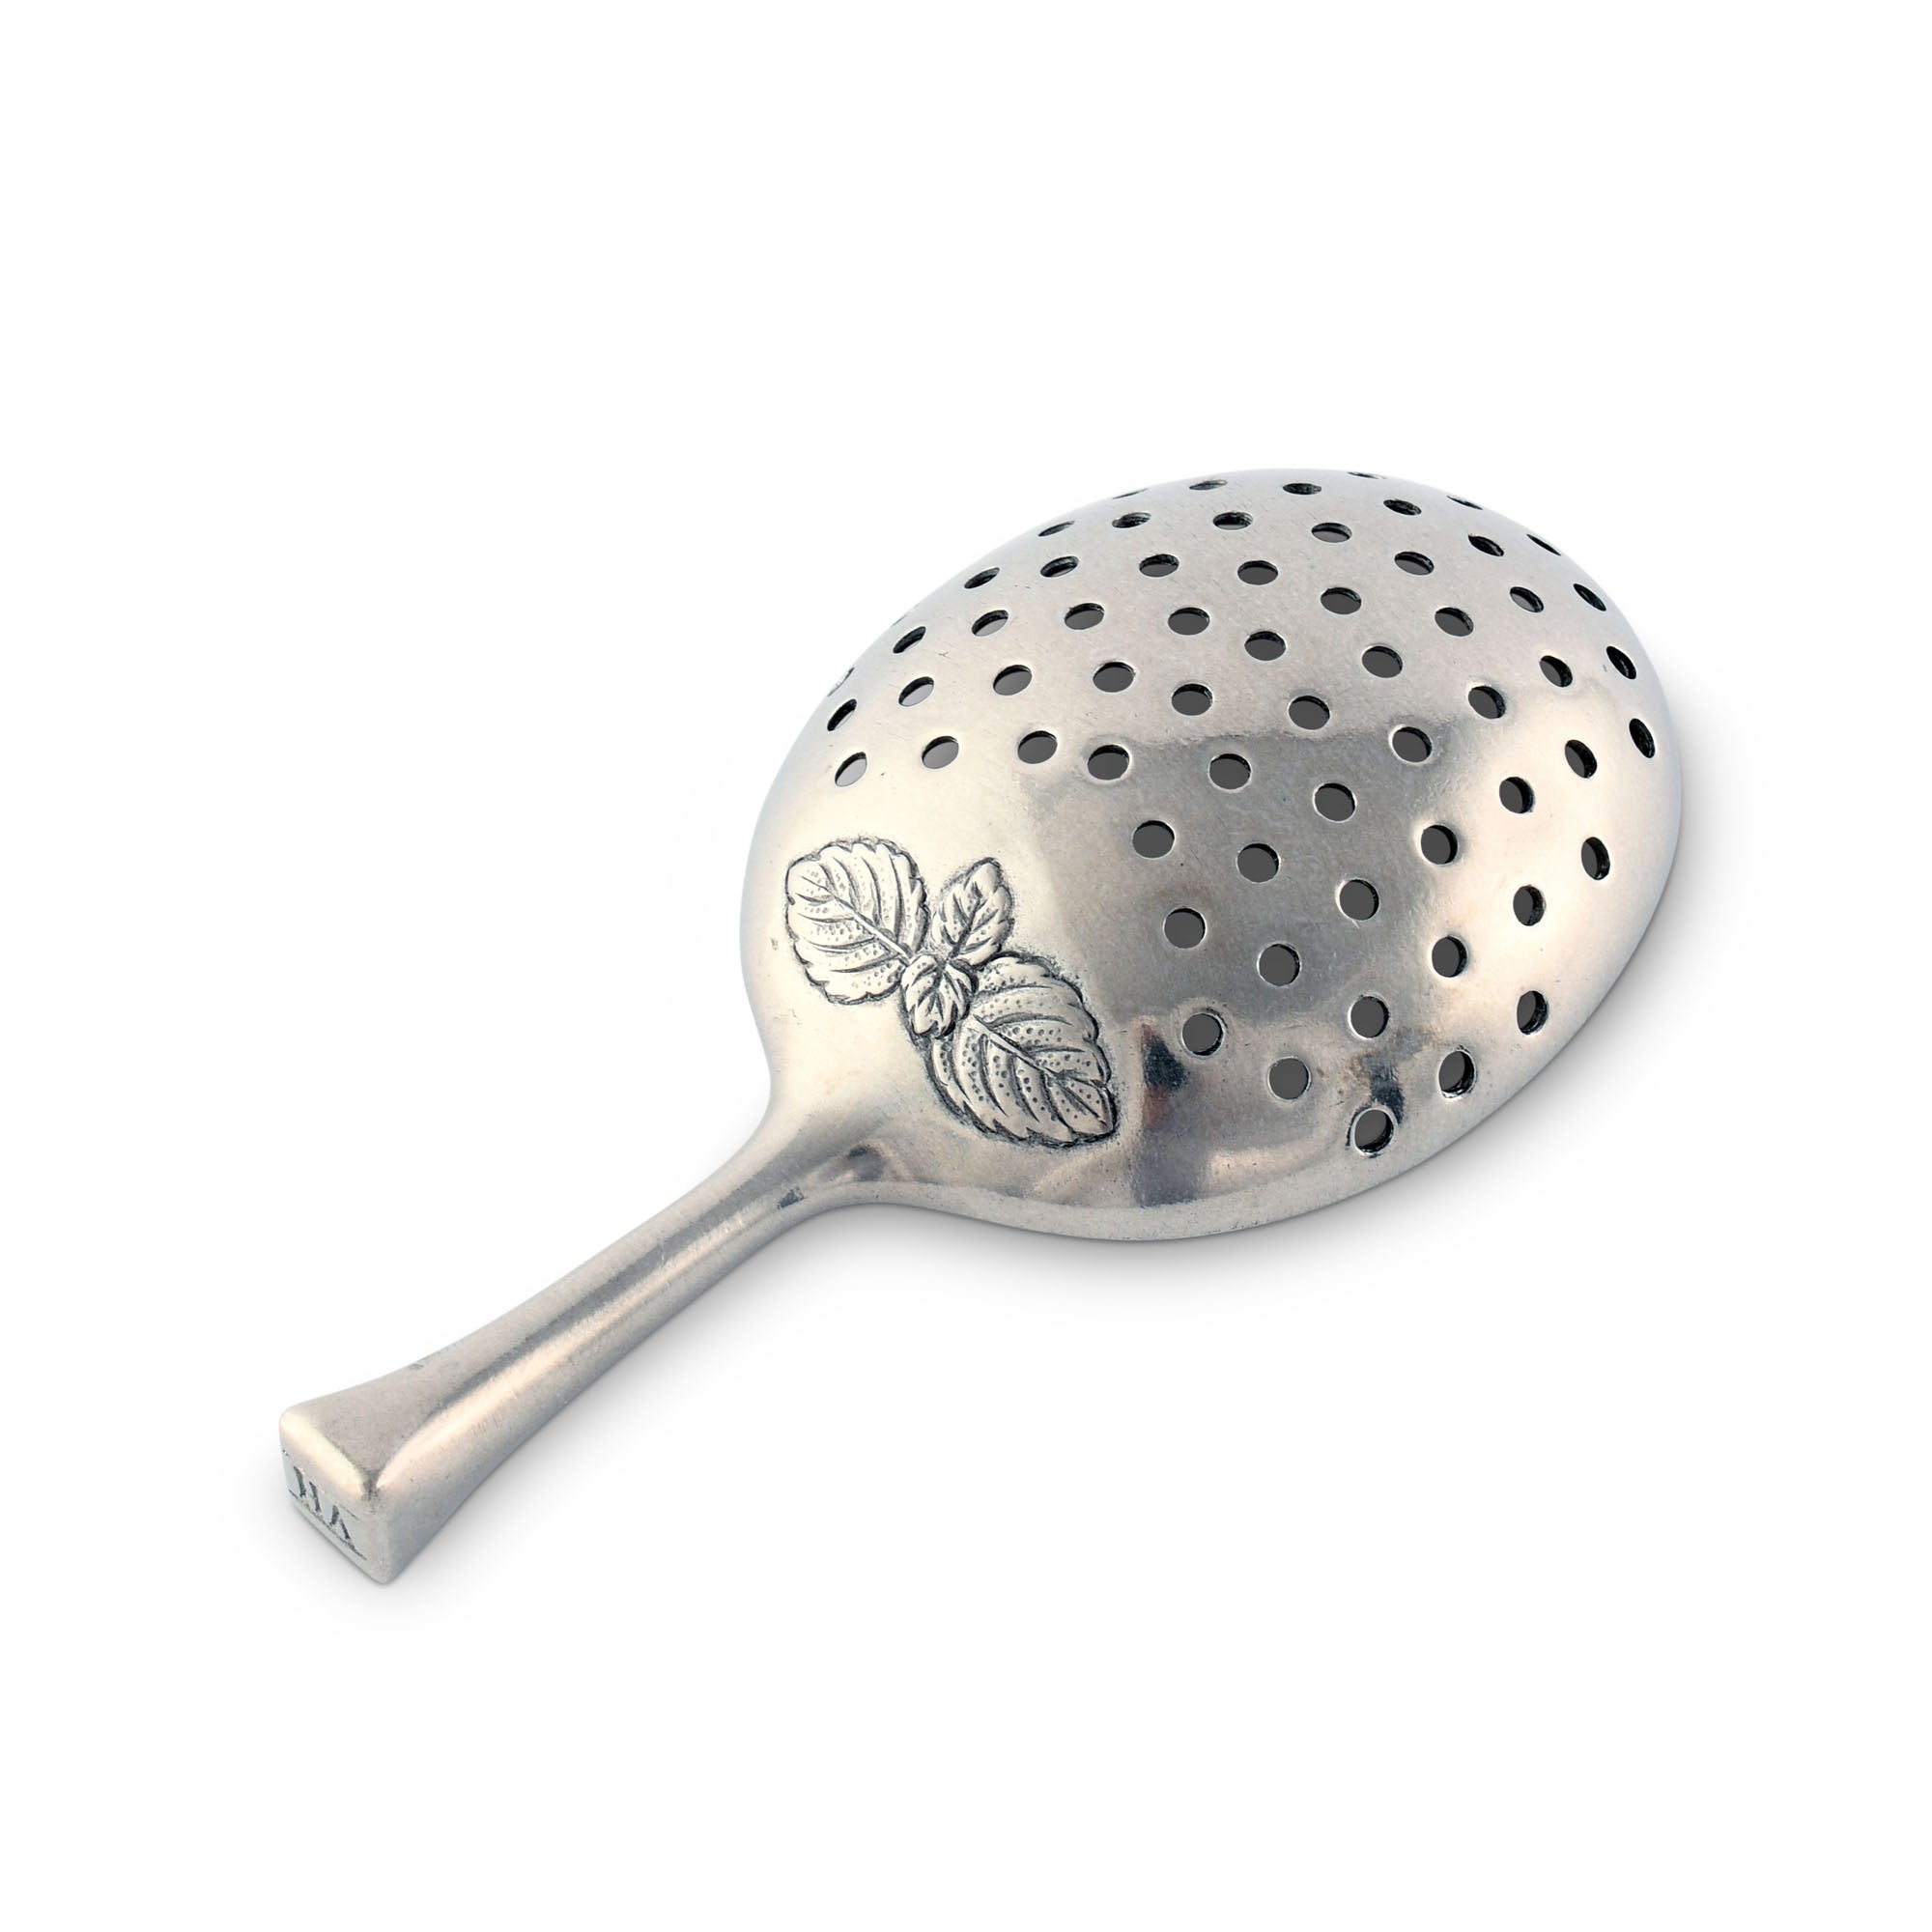 Vagabond House Classic Pewter Julep Strainer Product Image